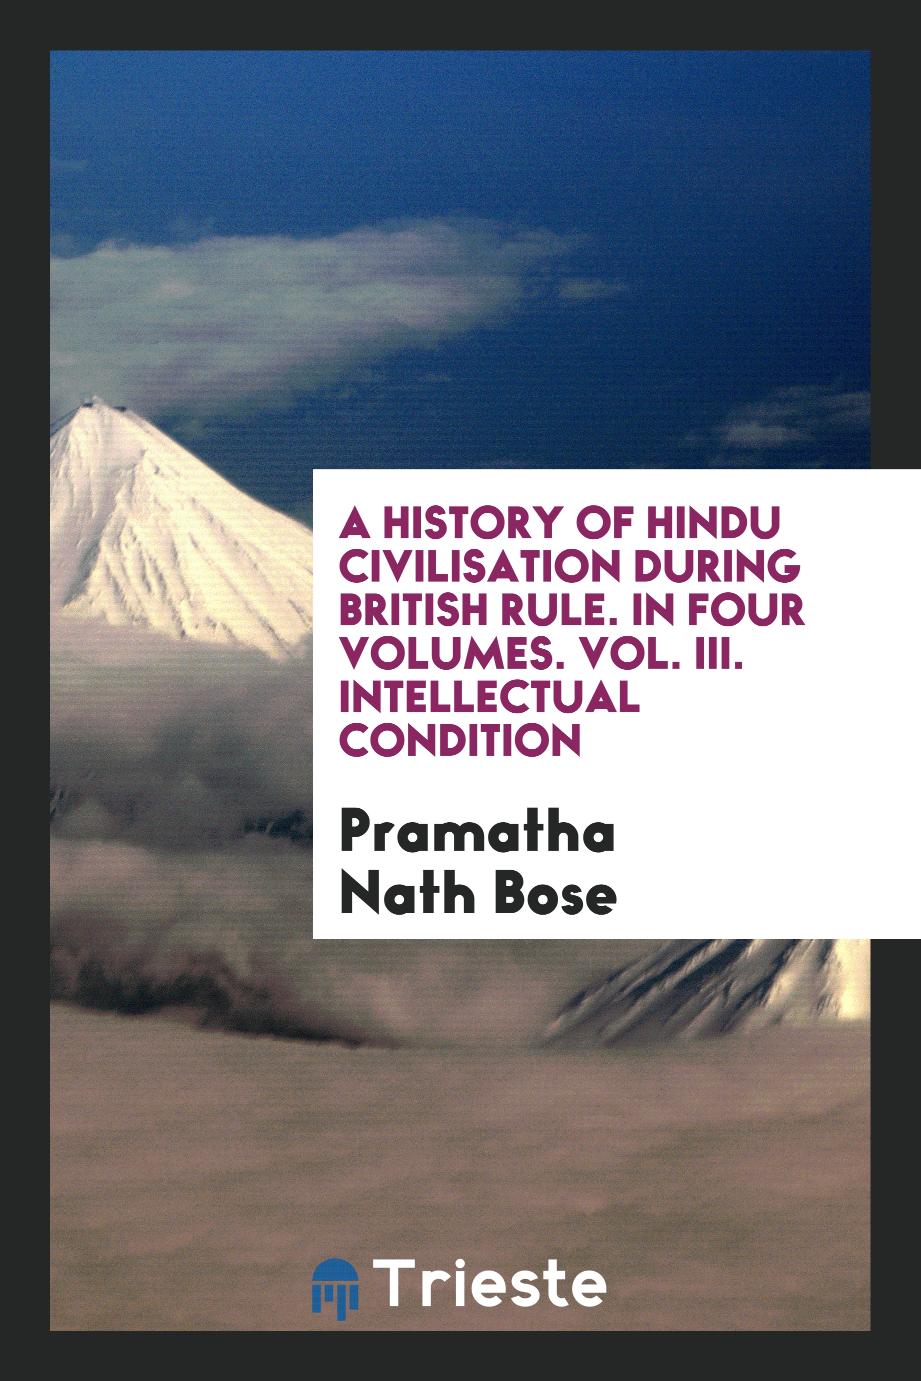 A History of Hindu Civilisation During British Rule. In Four Volumes. Vol. III. Intellectual Condition